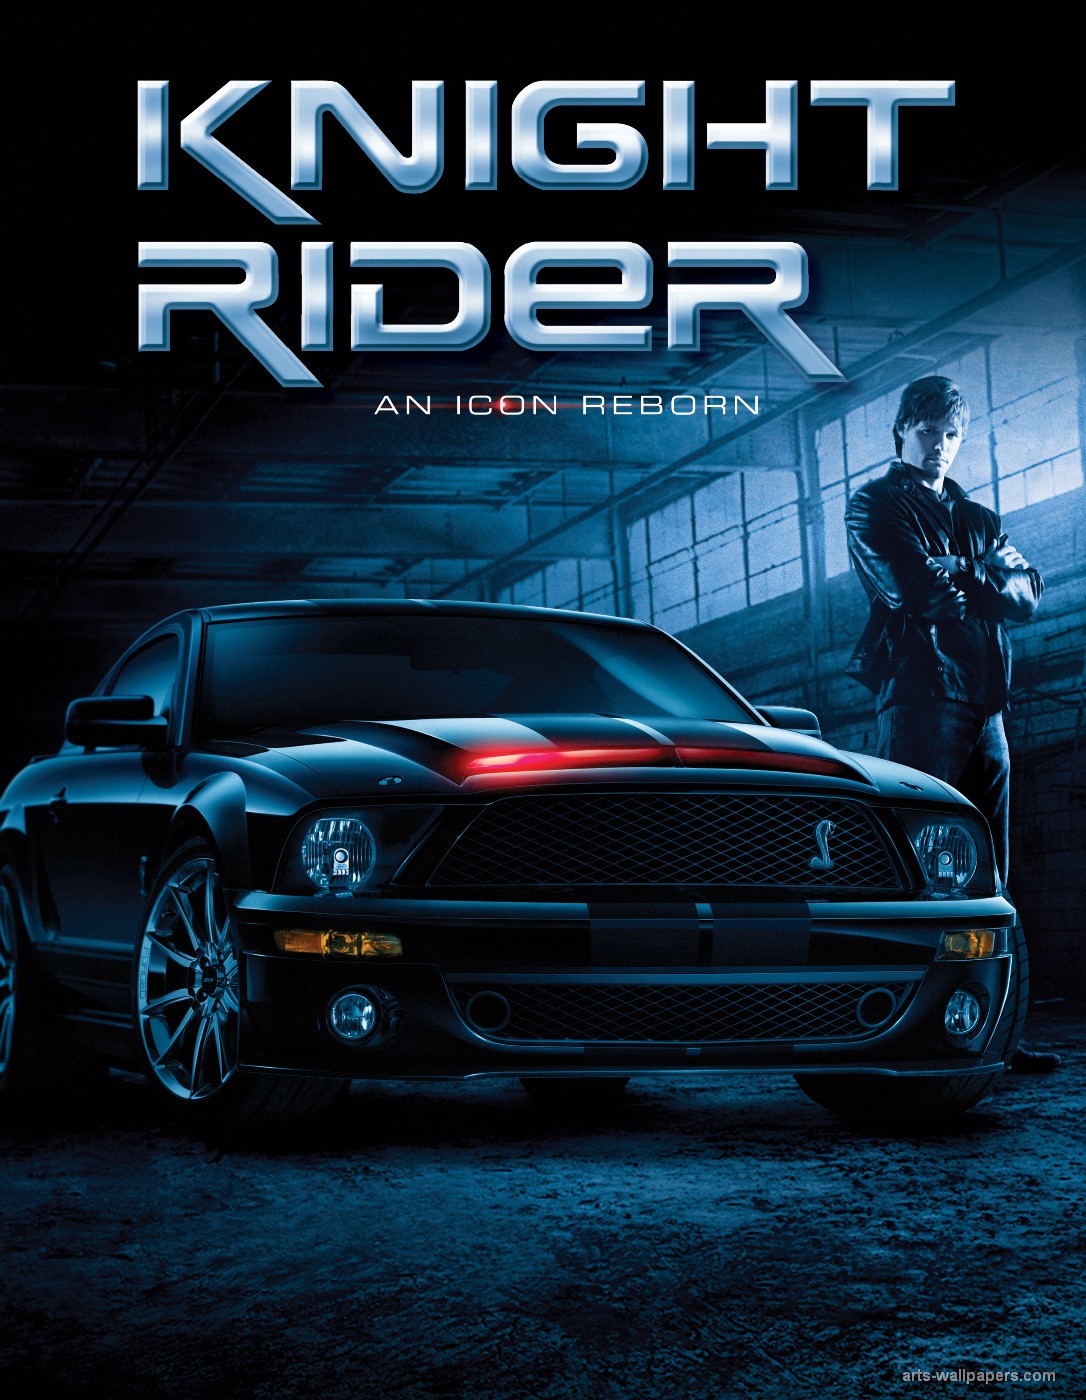 Knight Rider 2008 Wallpapers submited images